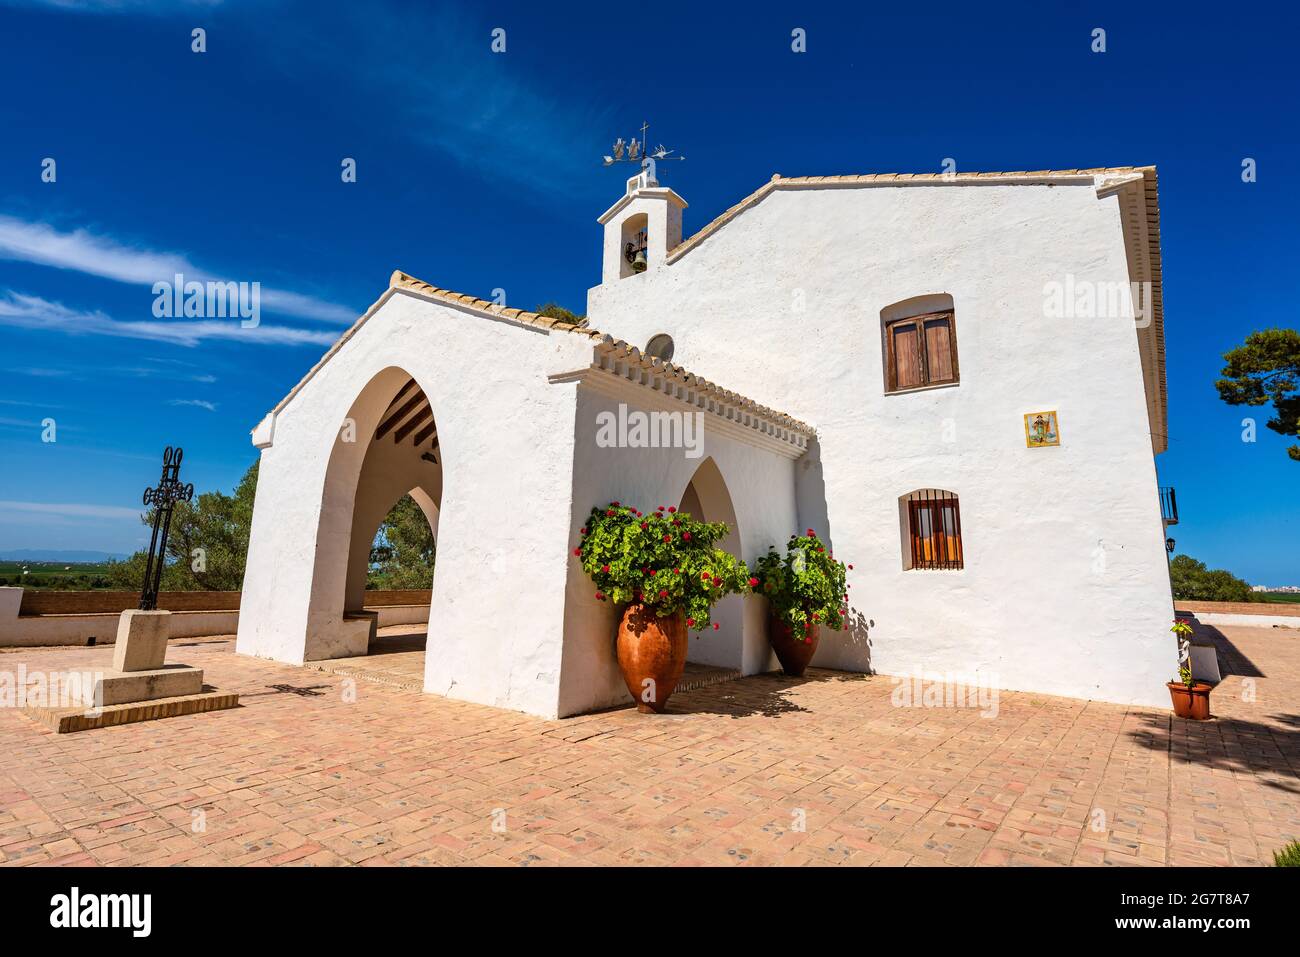 Sueca, Spain. Hermitage of the Saints. Muntanyeta dels Sants. White little building on top of a hill. Place of worship. Stock Photo